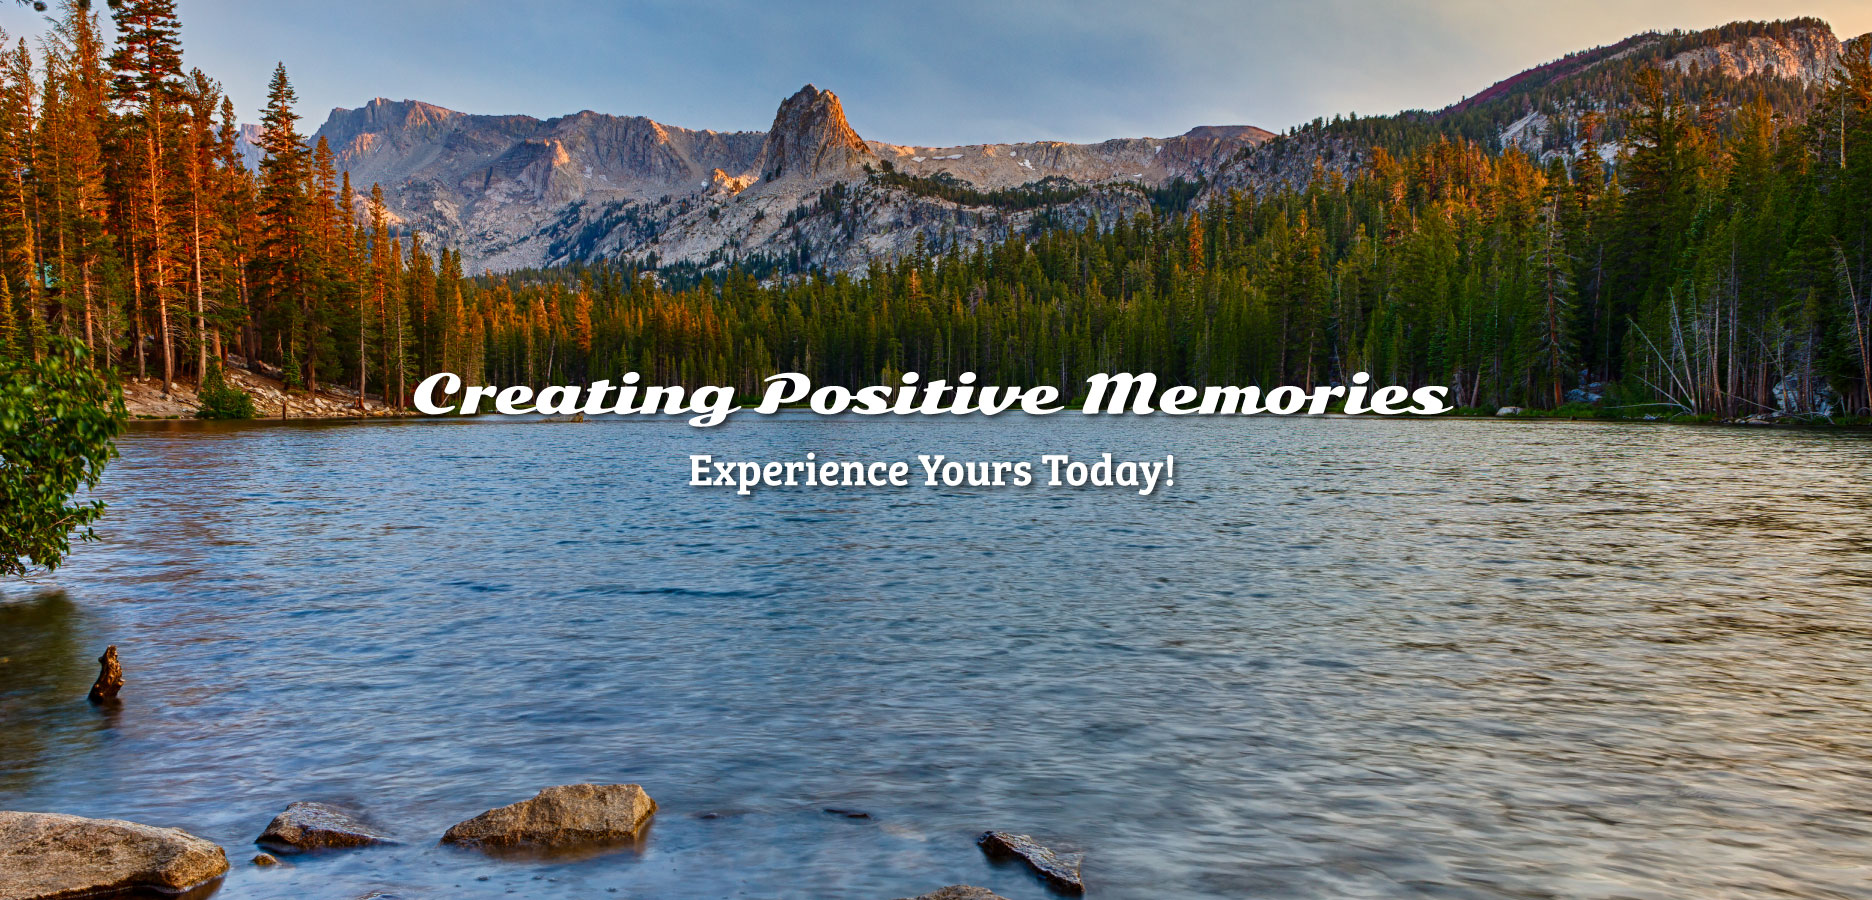 rocky mountain recreation company - creating positive memories, experience your today.